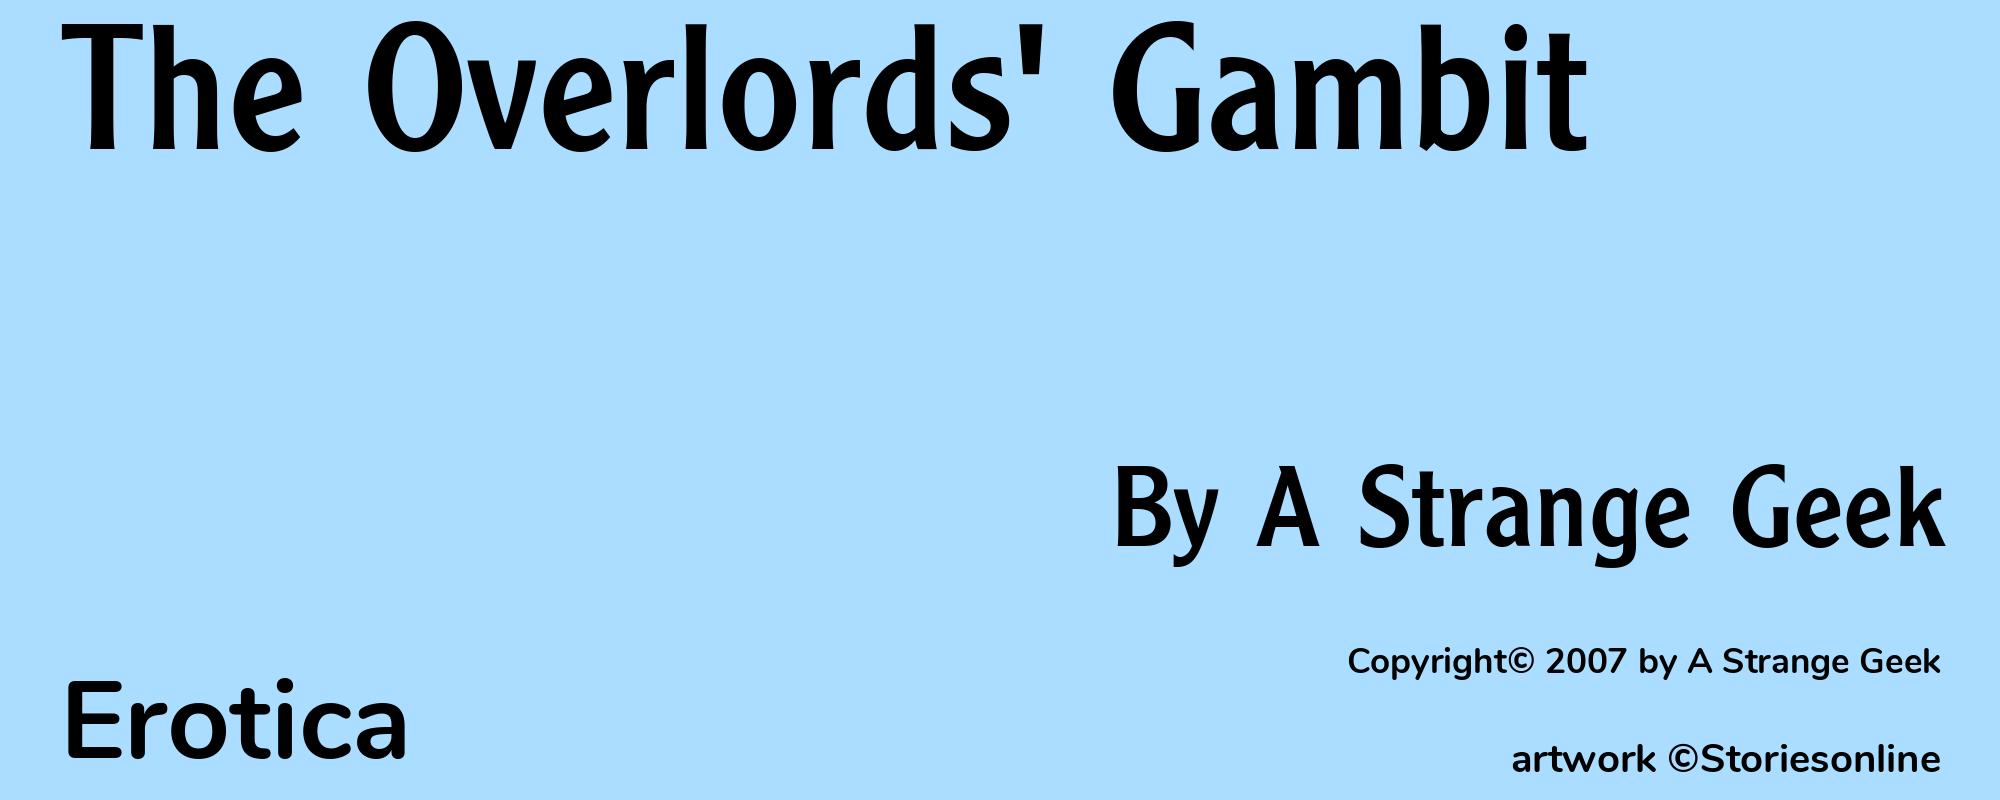 The Overlords' Gambit - Cover